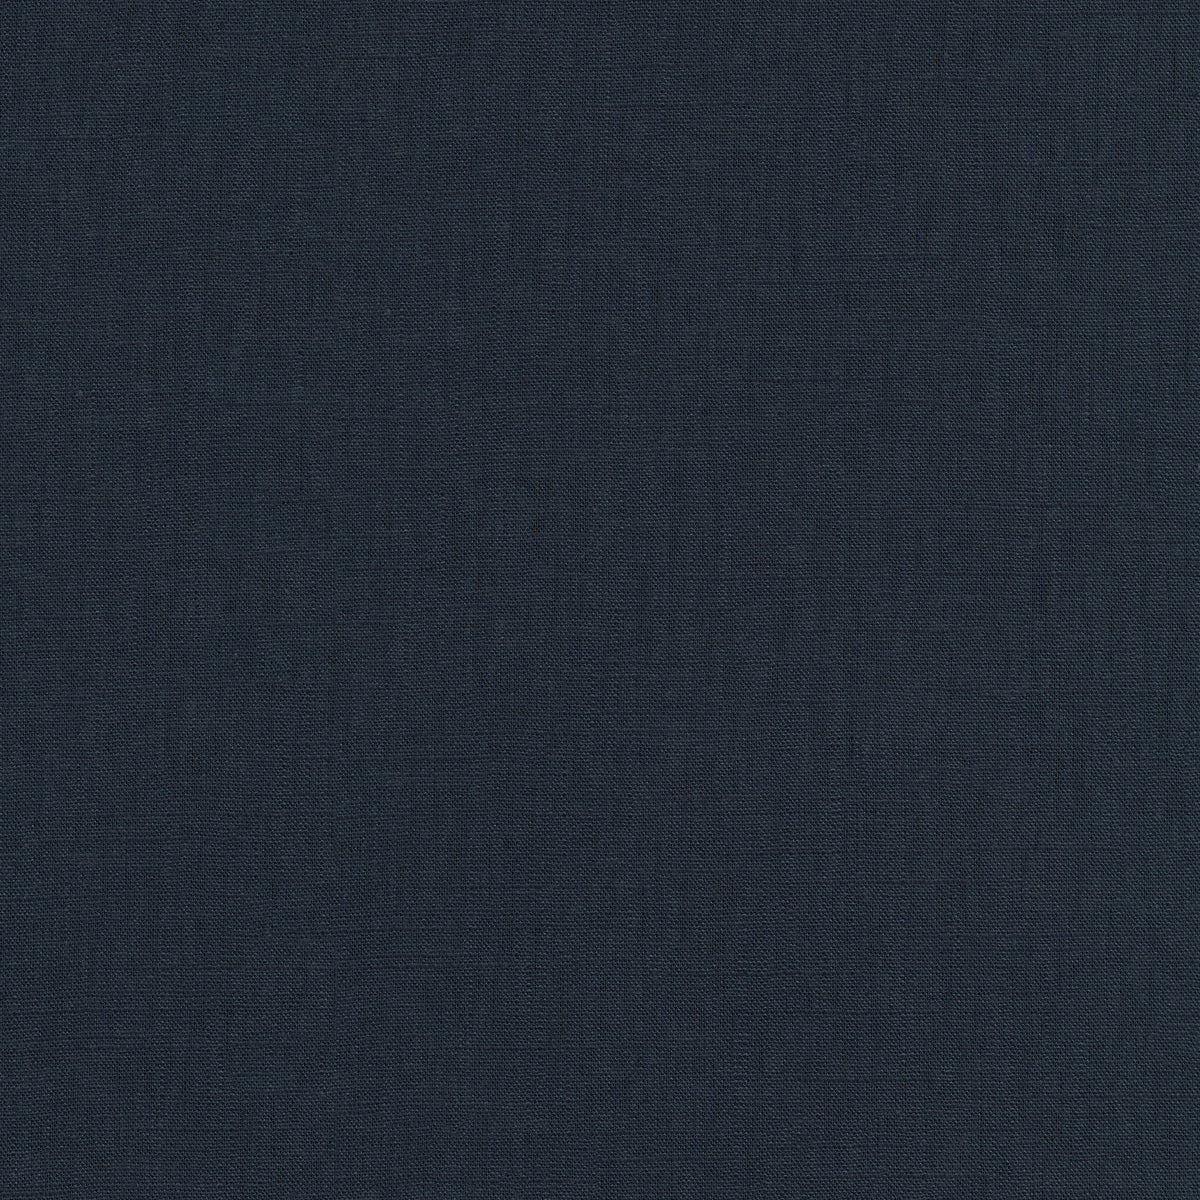 P/K Lifestyles Chester - Navy 412073 Fabric Swatch